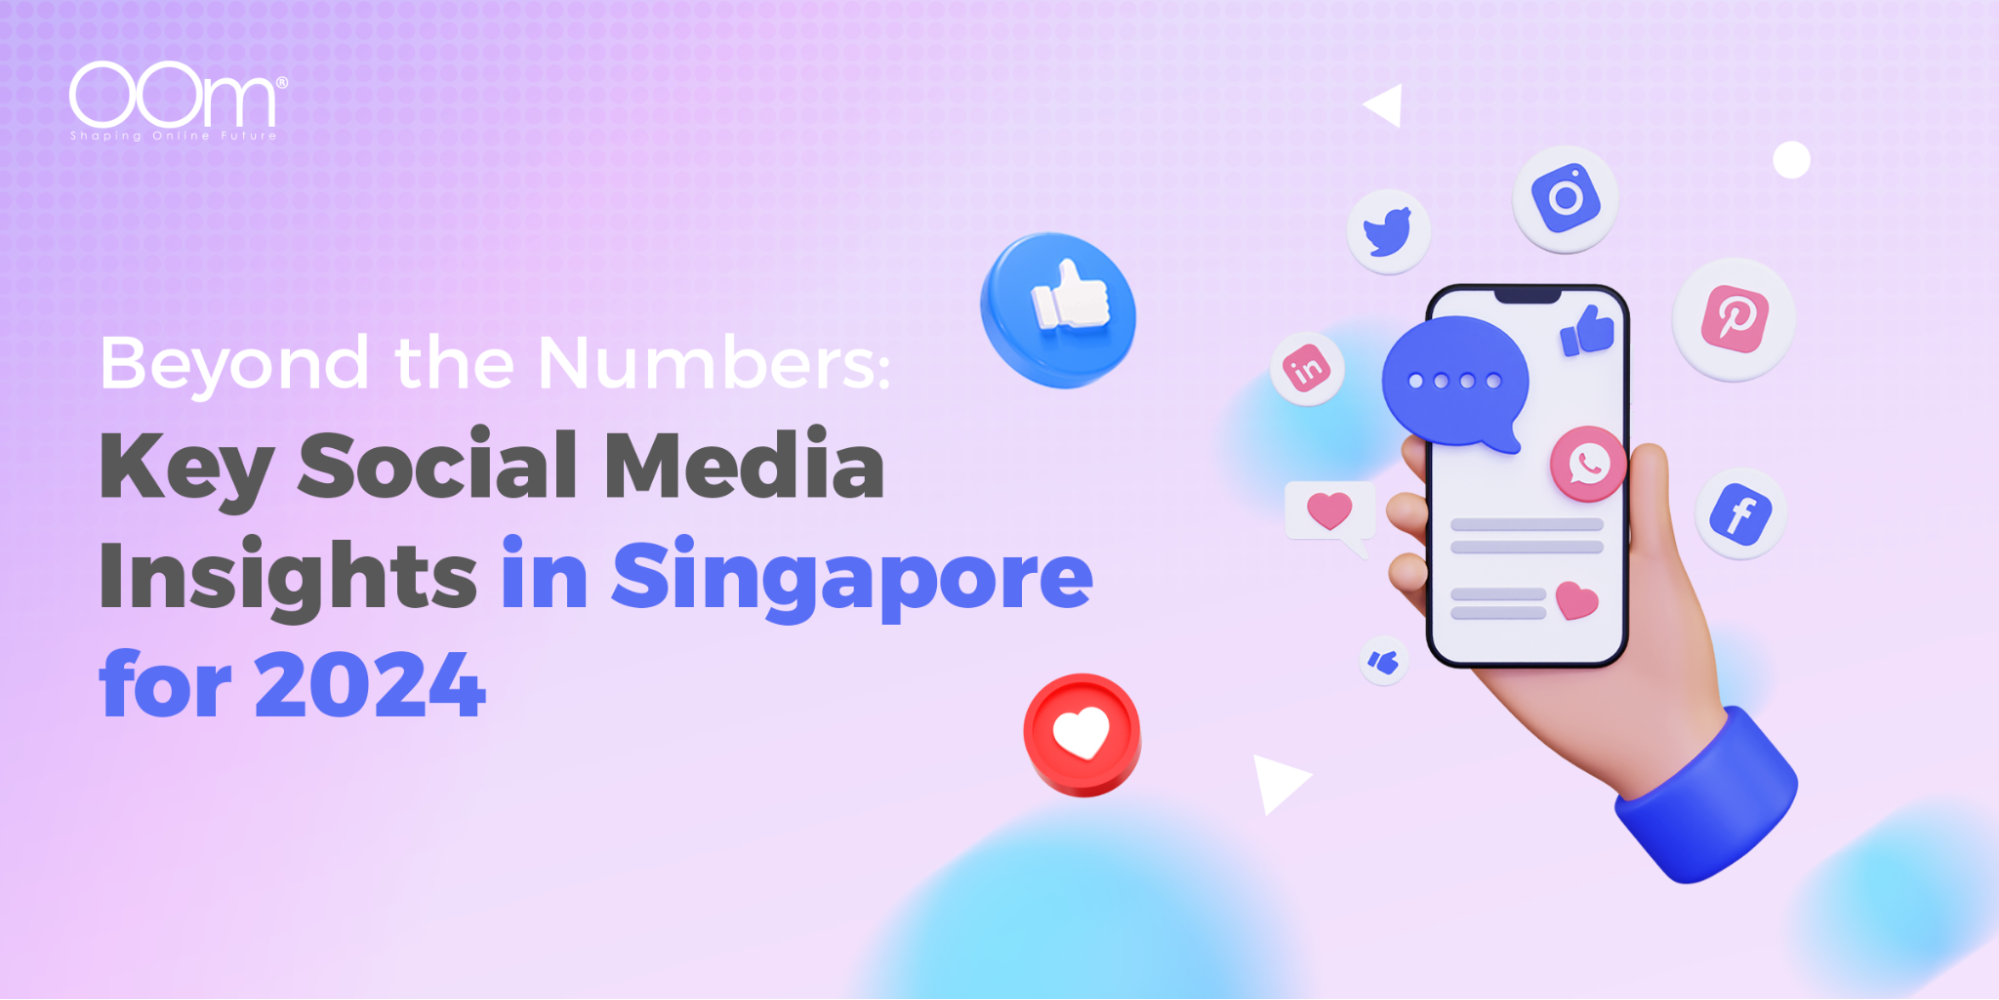 Key social media insights in Singapore for 2024